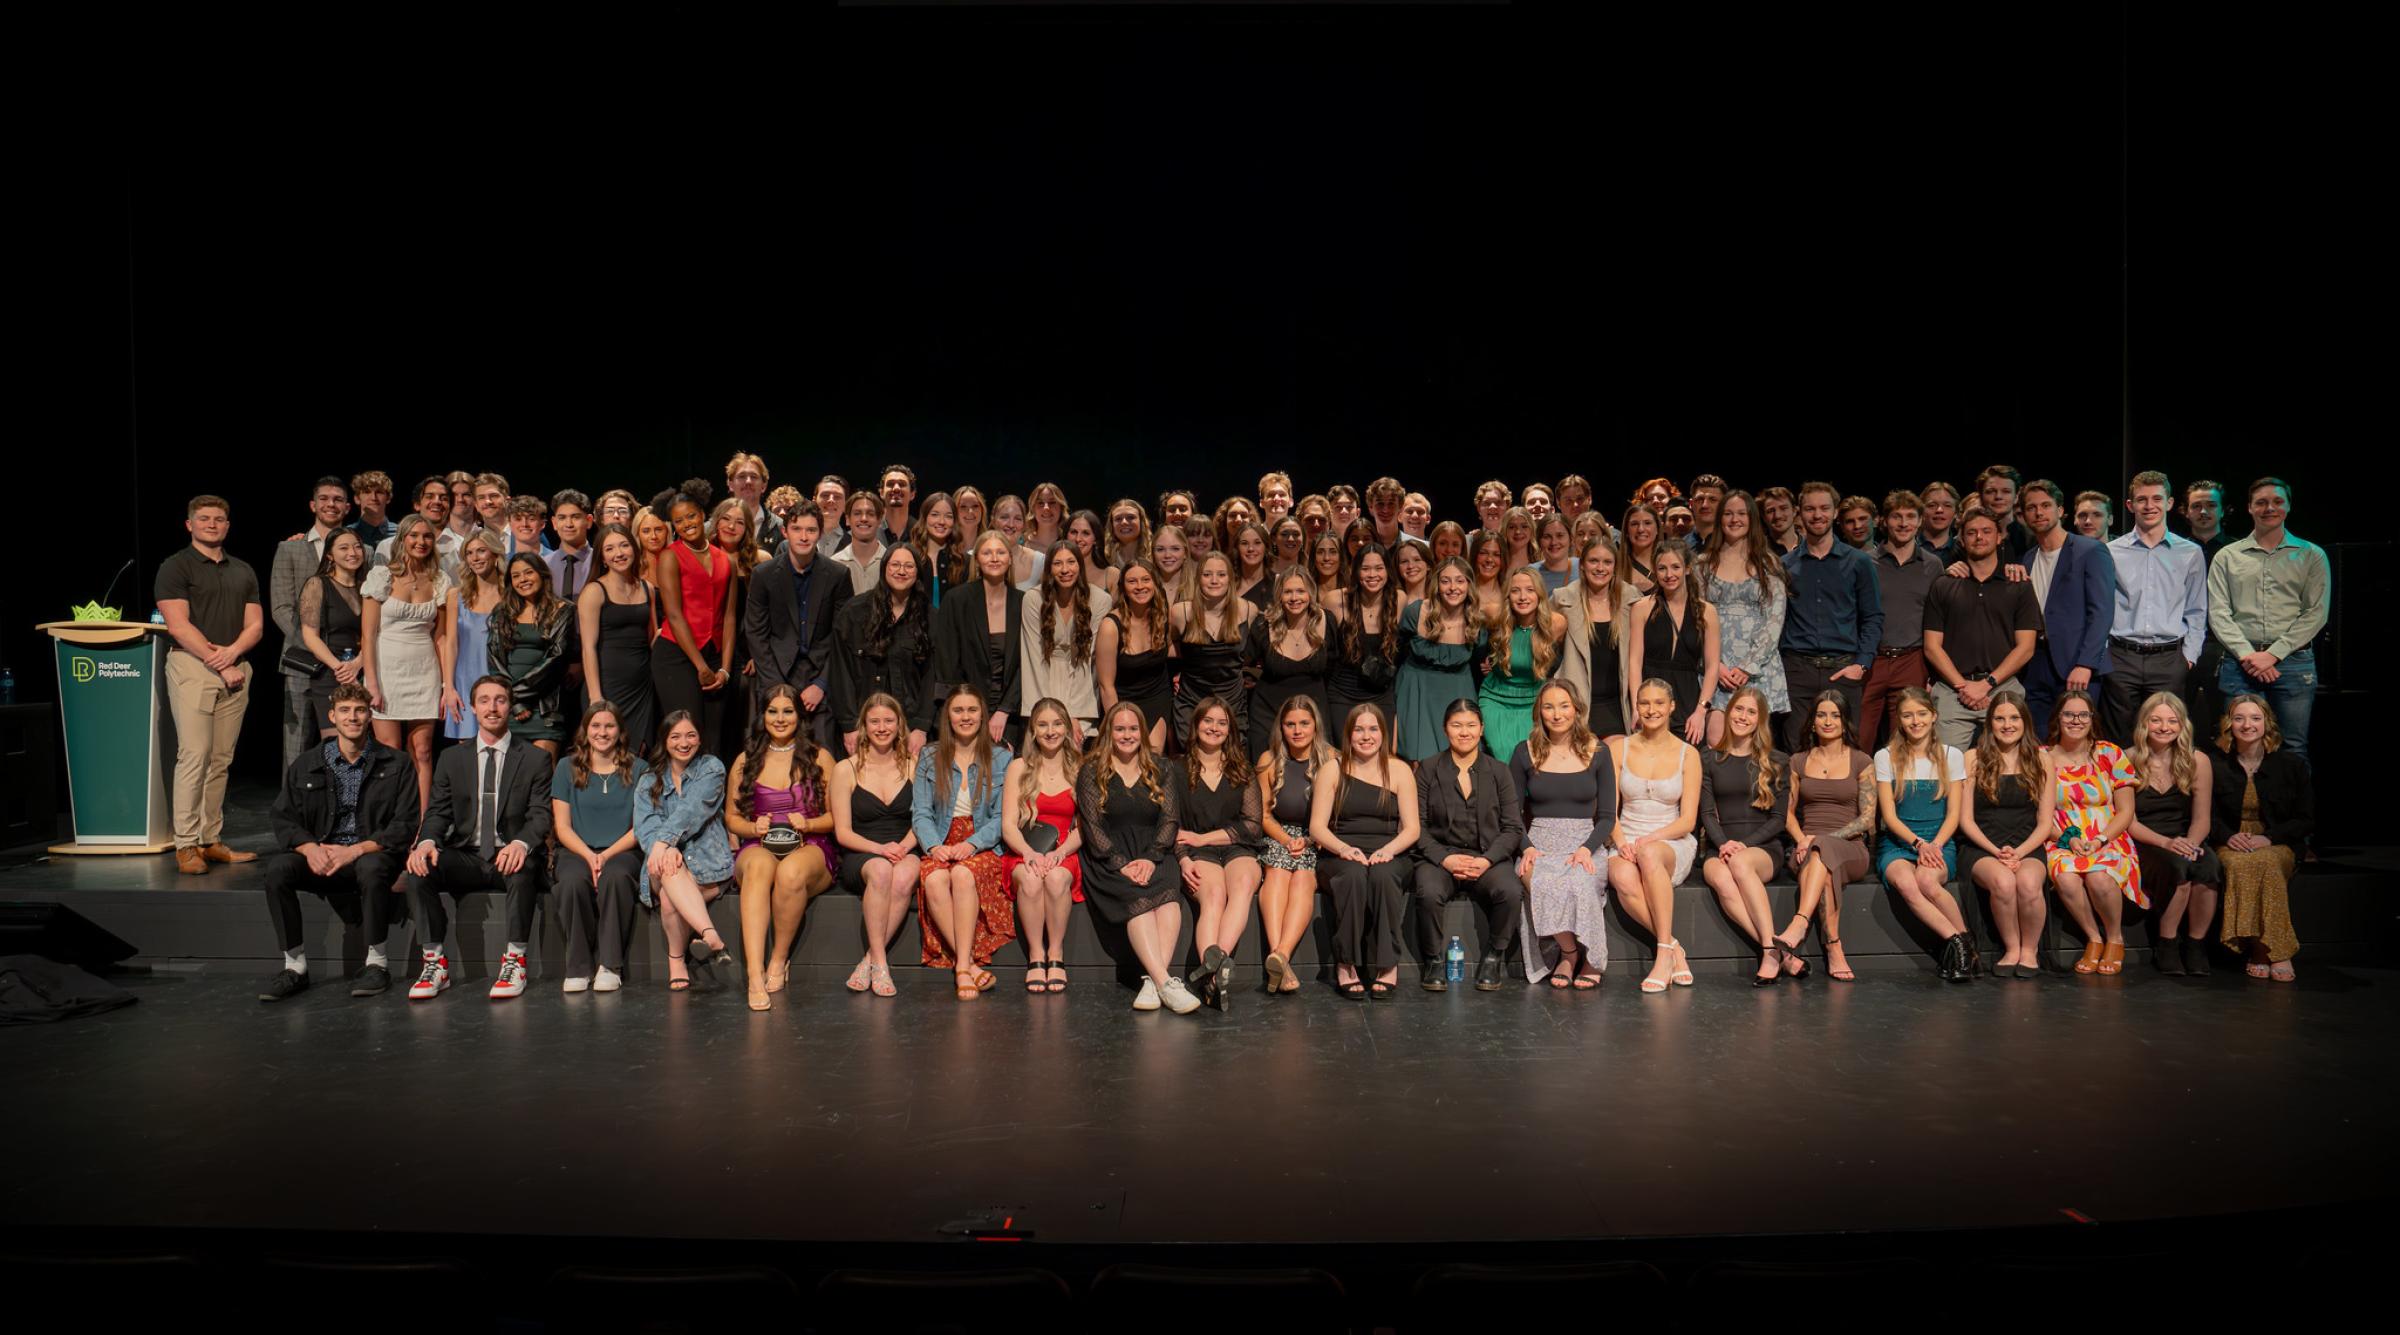 A group shot of RDP athletes on the stage during the Awards Banquet